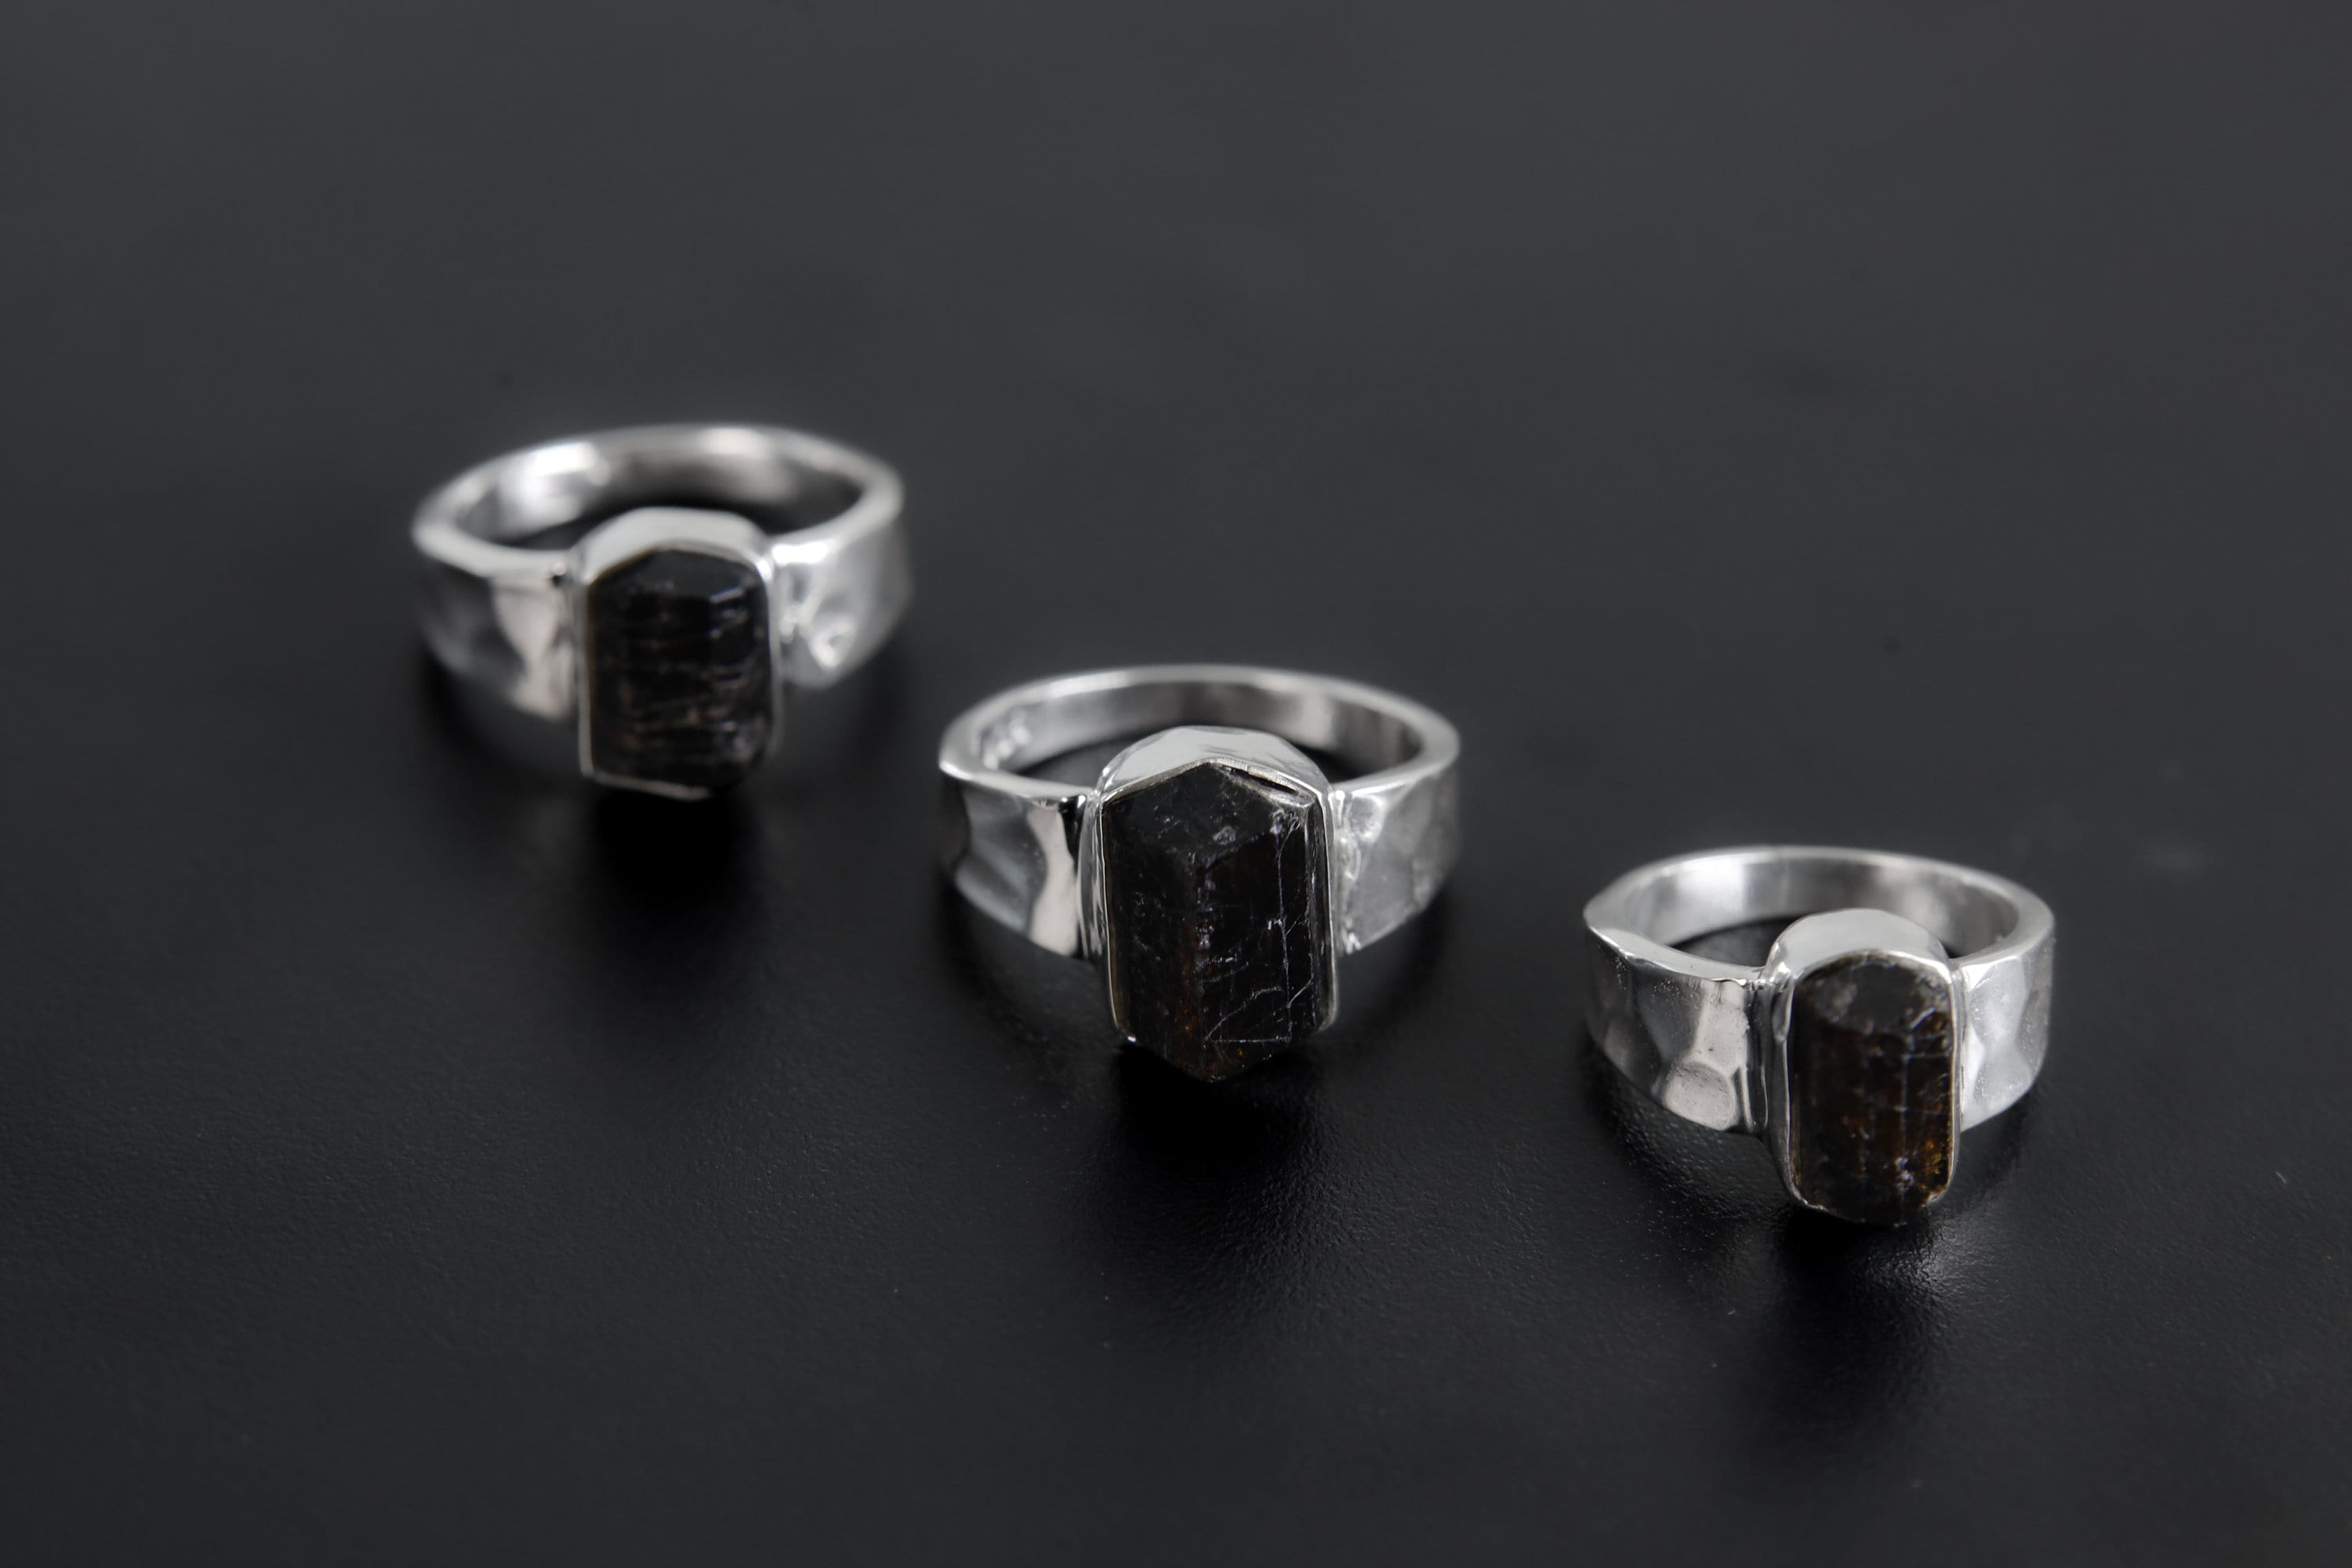 Double Terminated Black Tourmaline Ring - Hammered - 925 Sterling Silver Setting - Unisex - High Shine Polish - Protection & Grounding